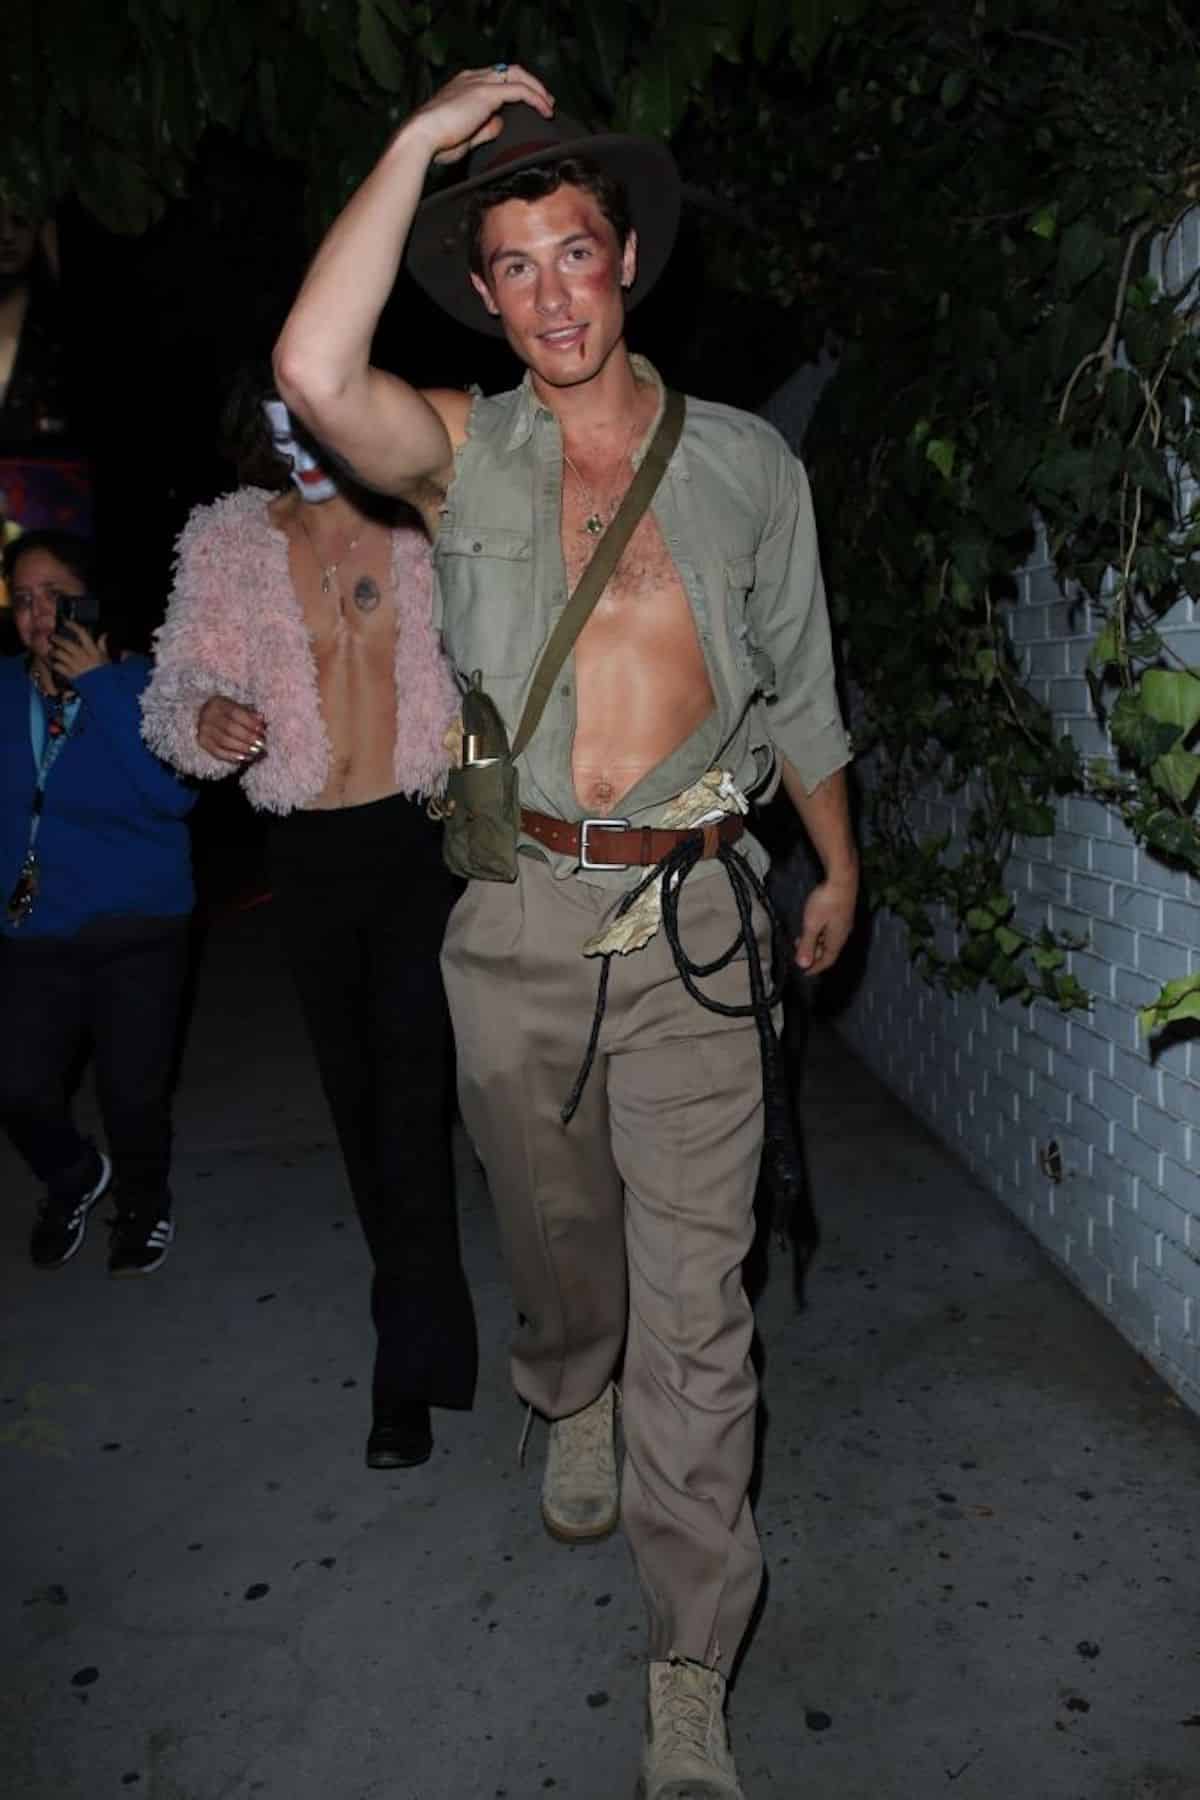 Shawn Mendes dressed as Indiana Jones while attending the Vas Morgan Halloween party in West Hollywood. Pic credit: GIO / BACKGRID